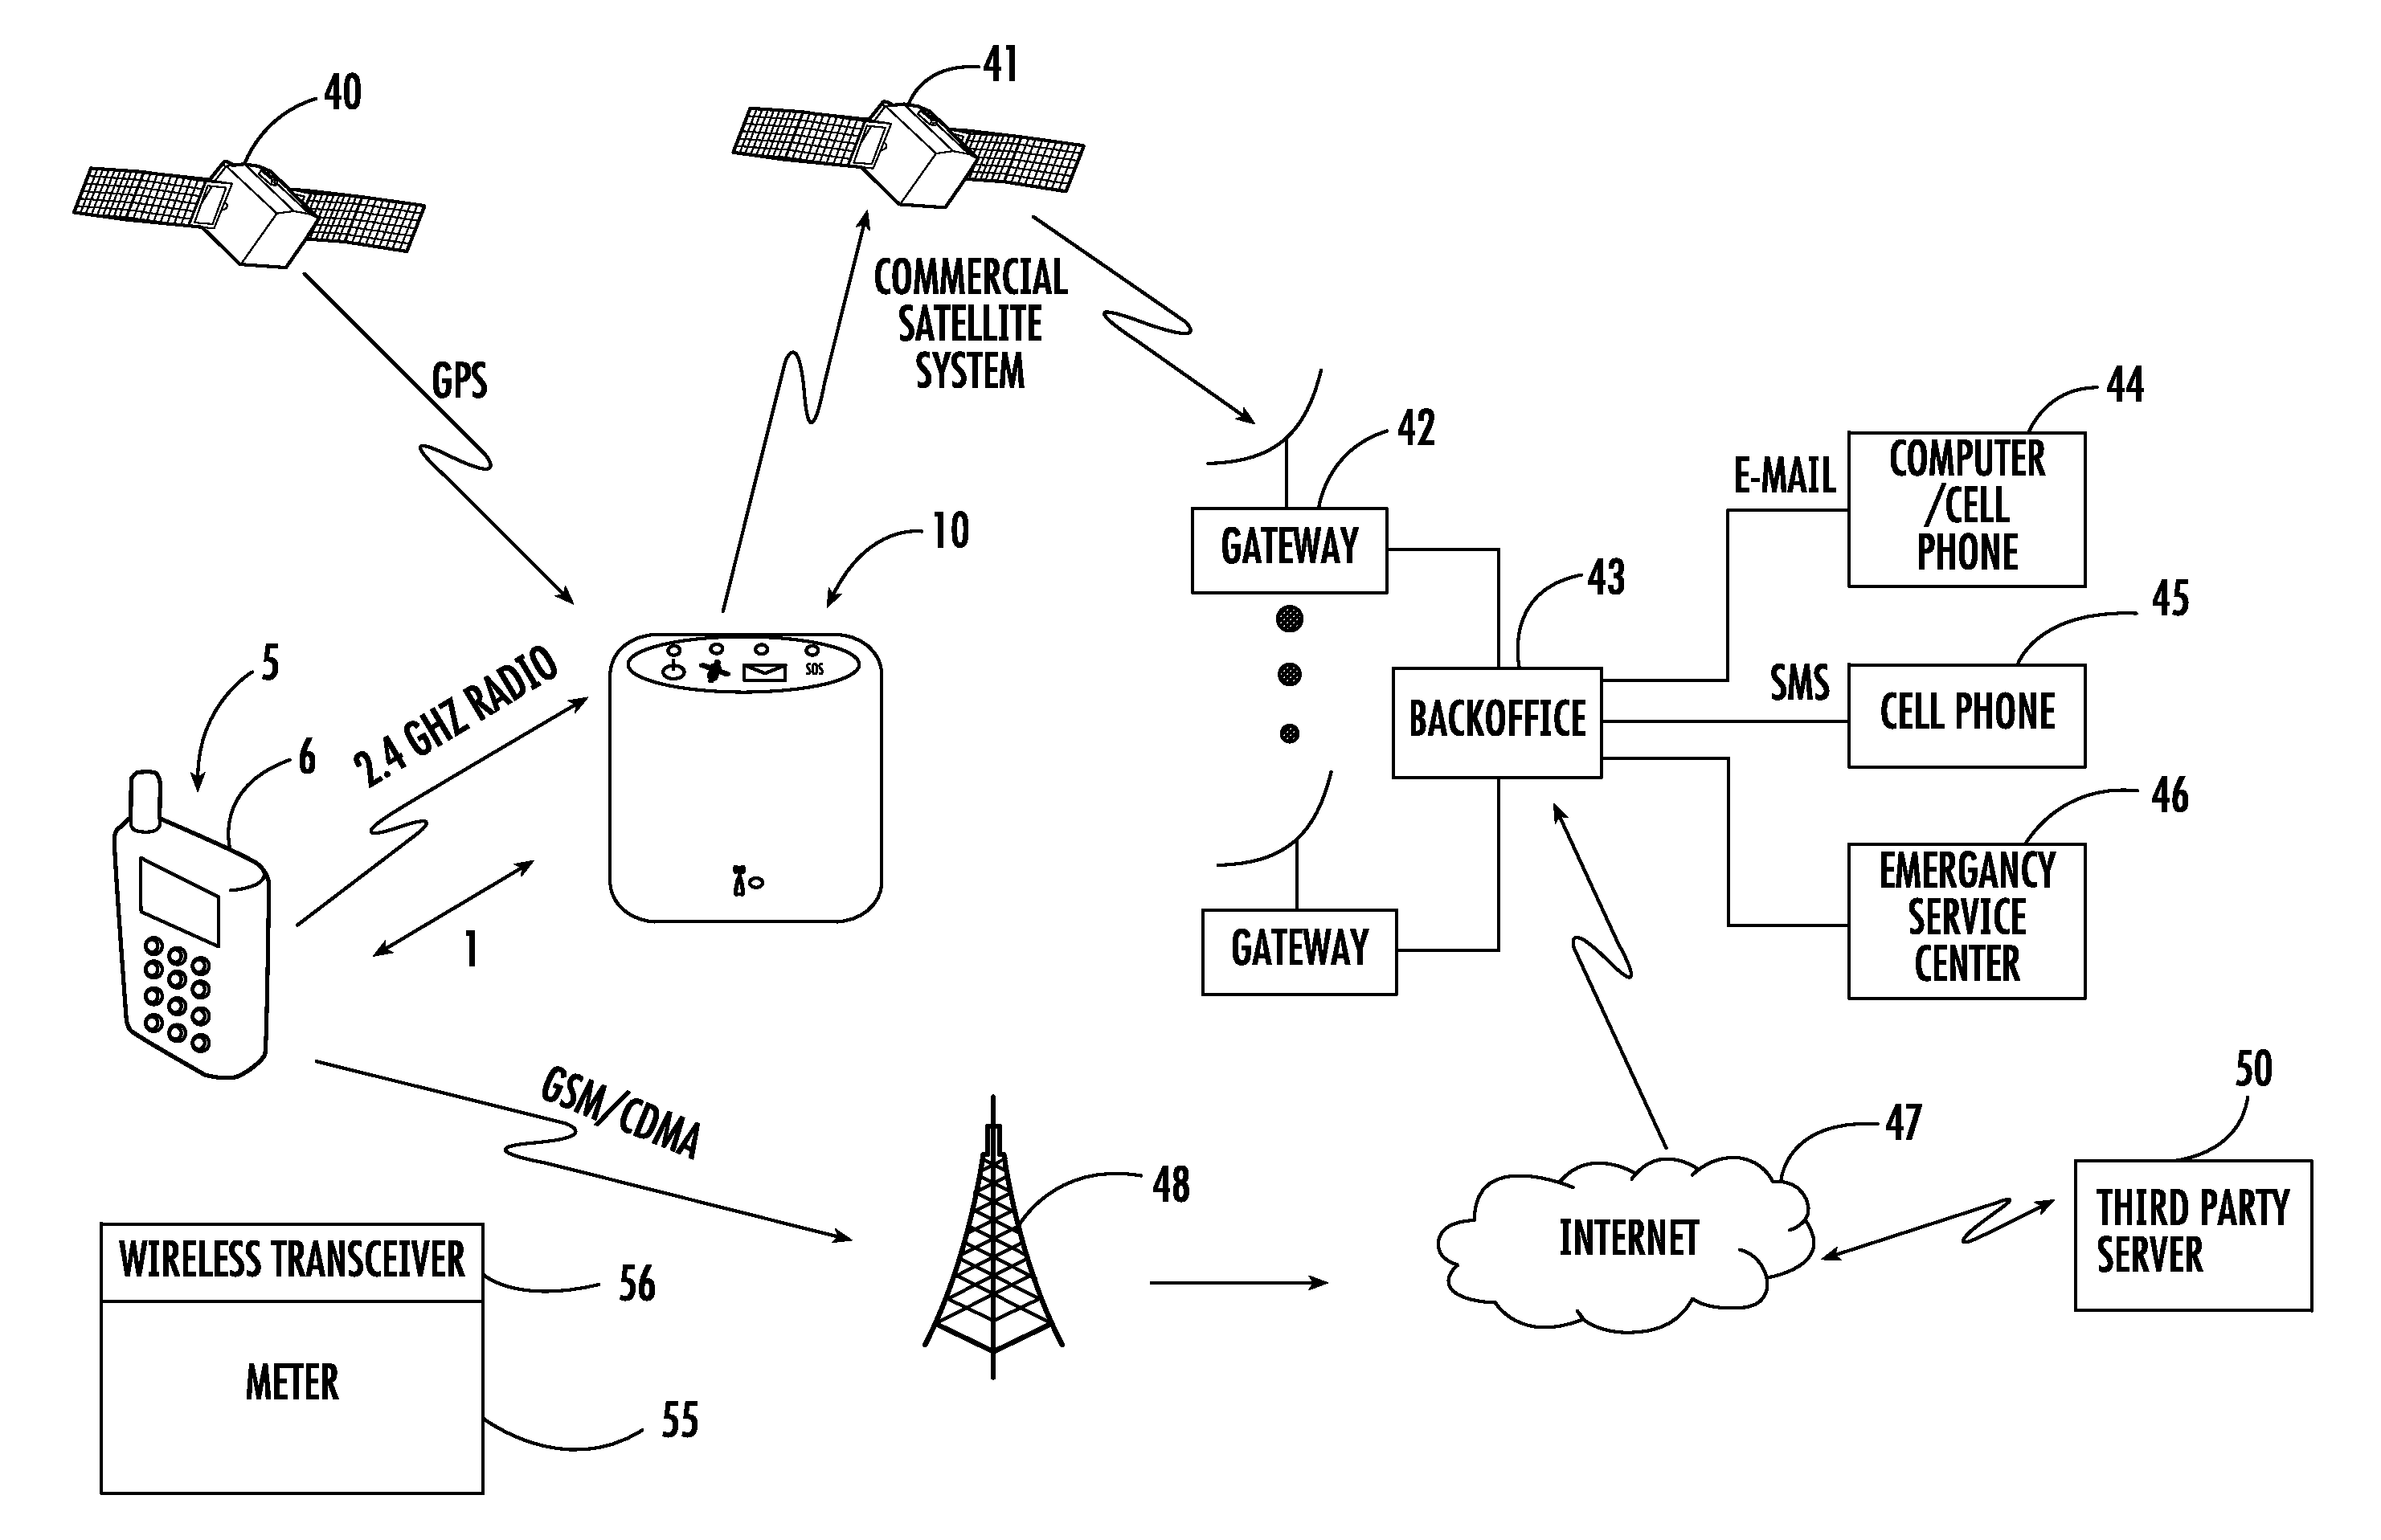 Method and apparatus for transmitting message from short-range wireless device over a satellite network